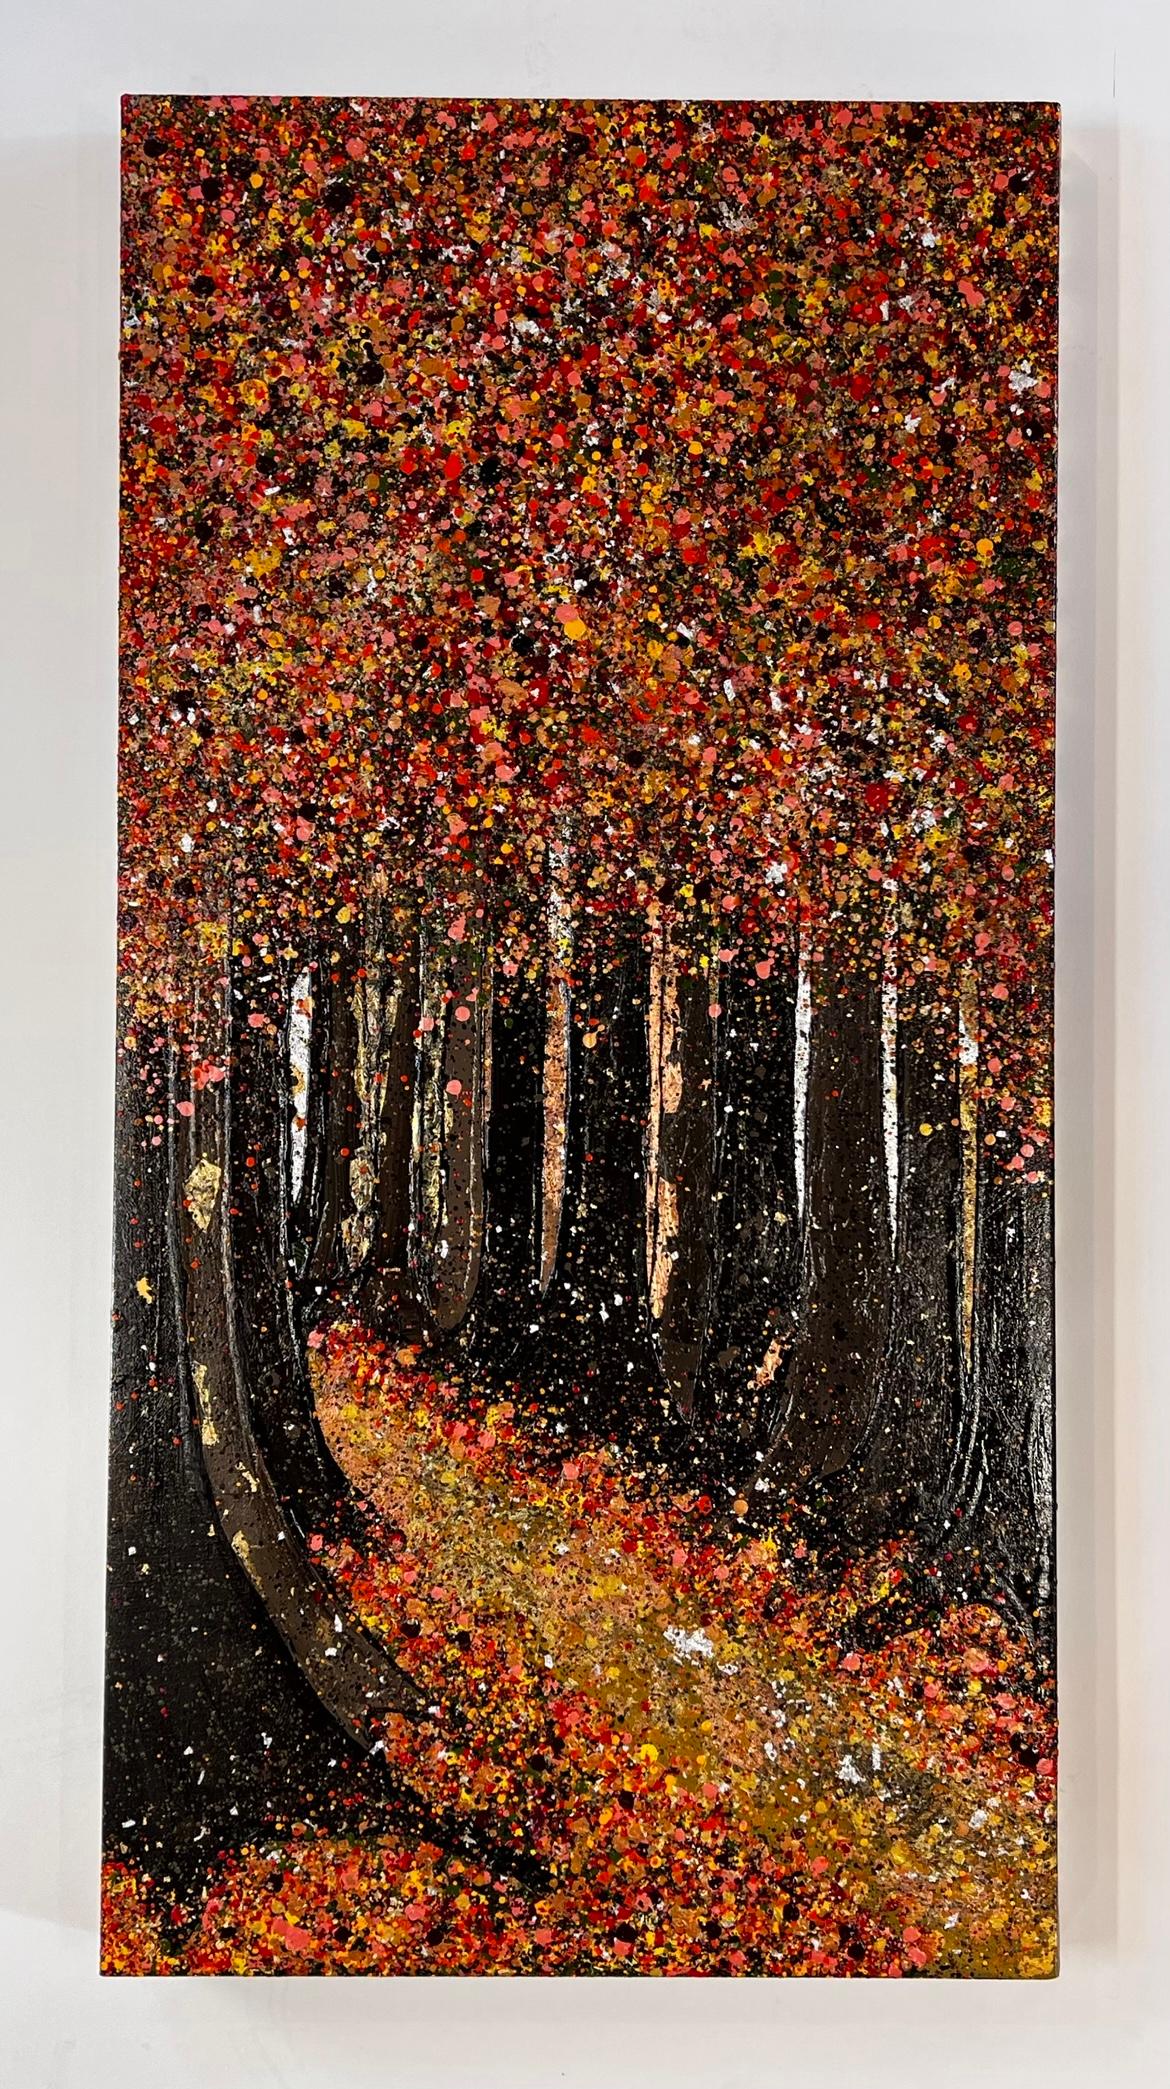 Tumbling Autumn Leaves - Painting by Nicky Chubb